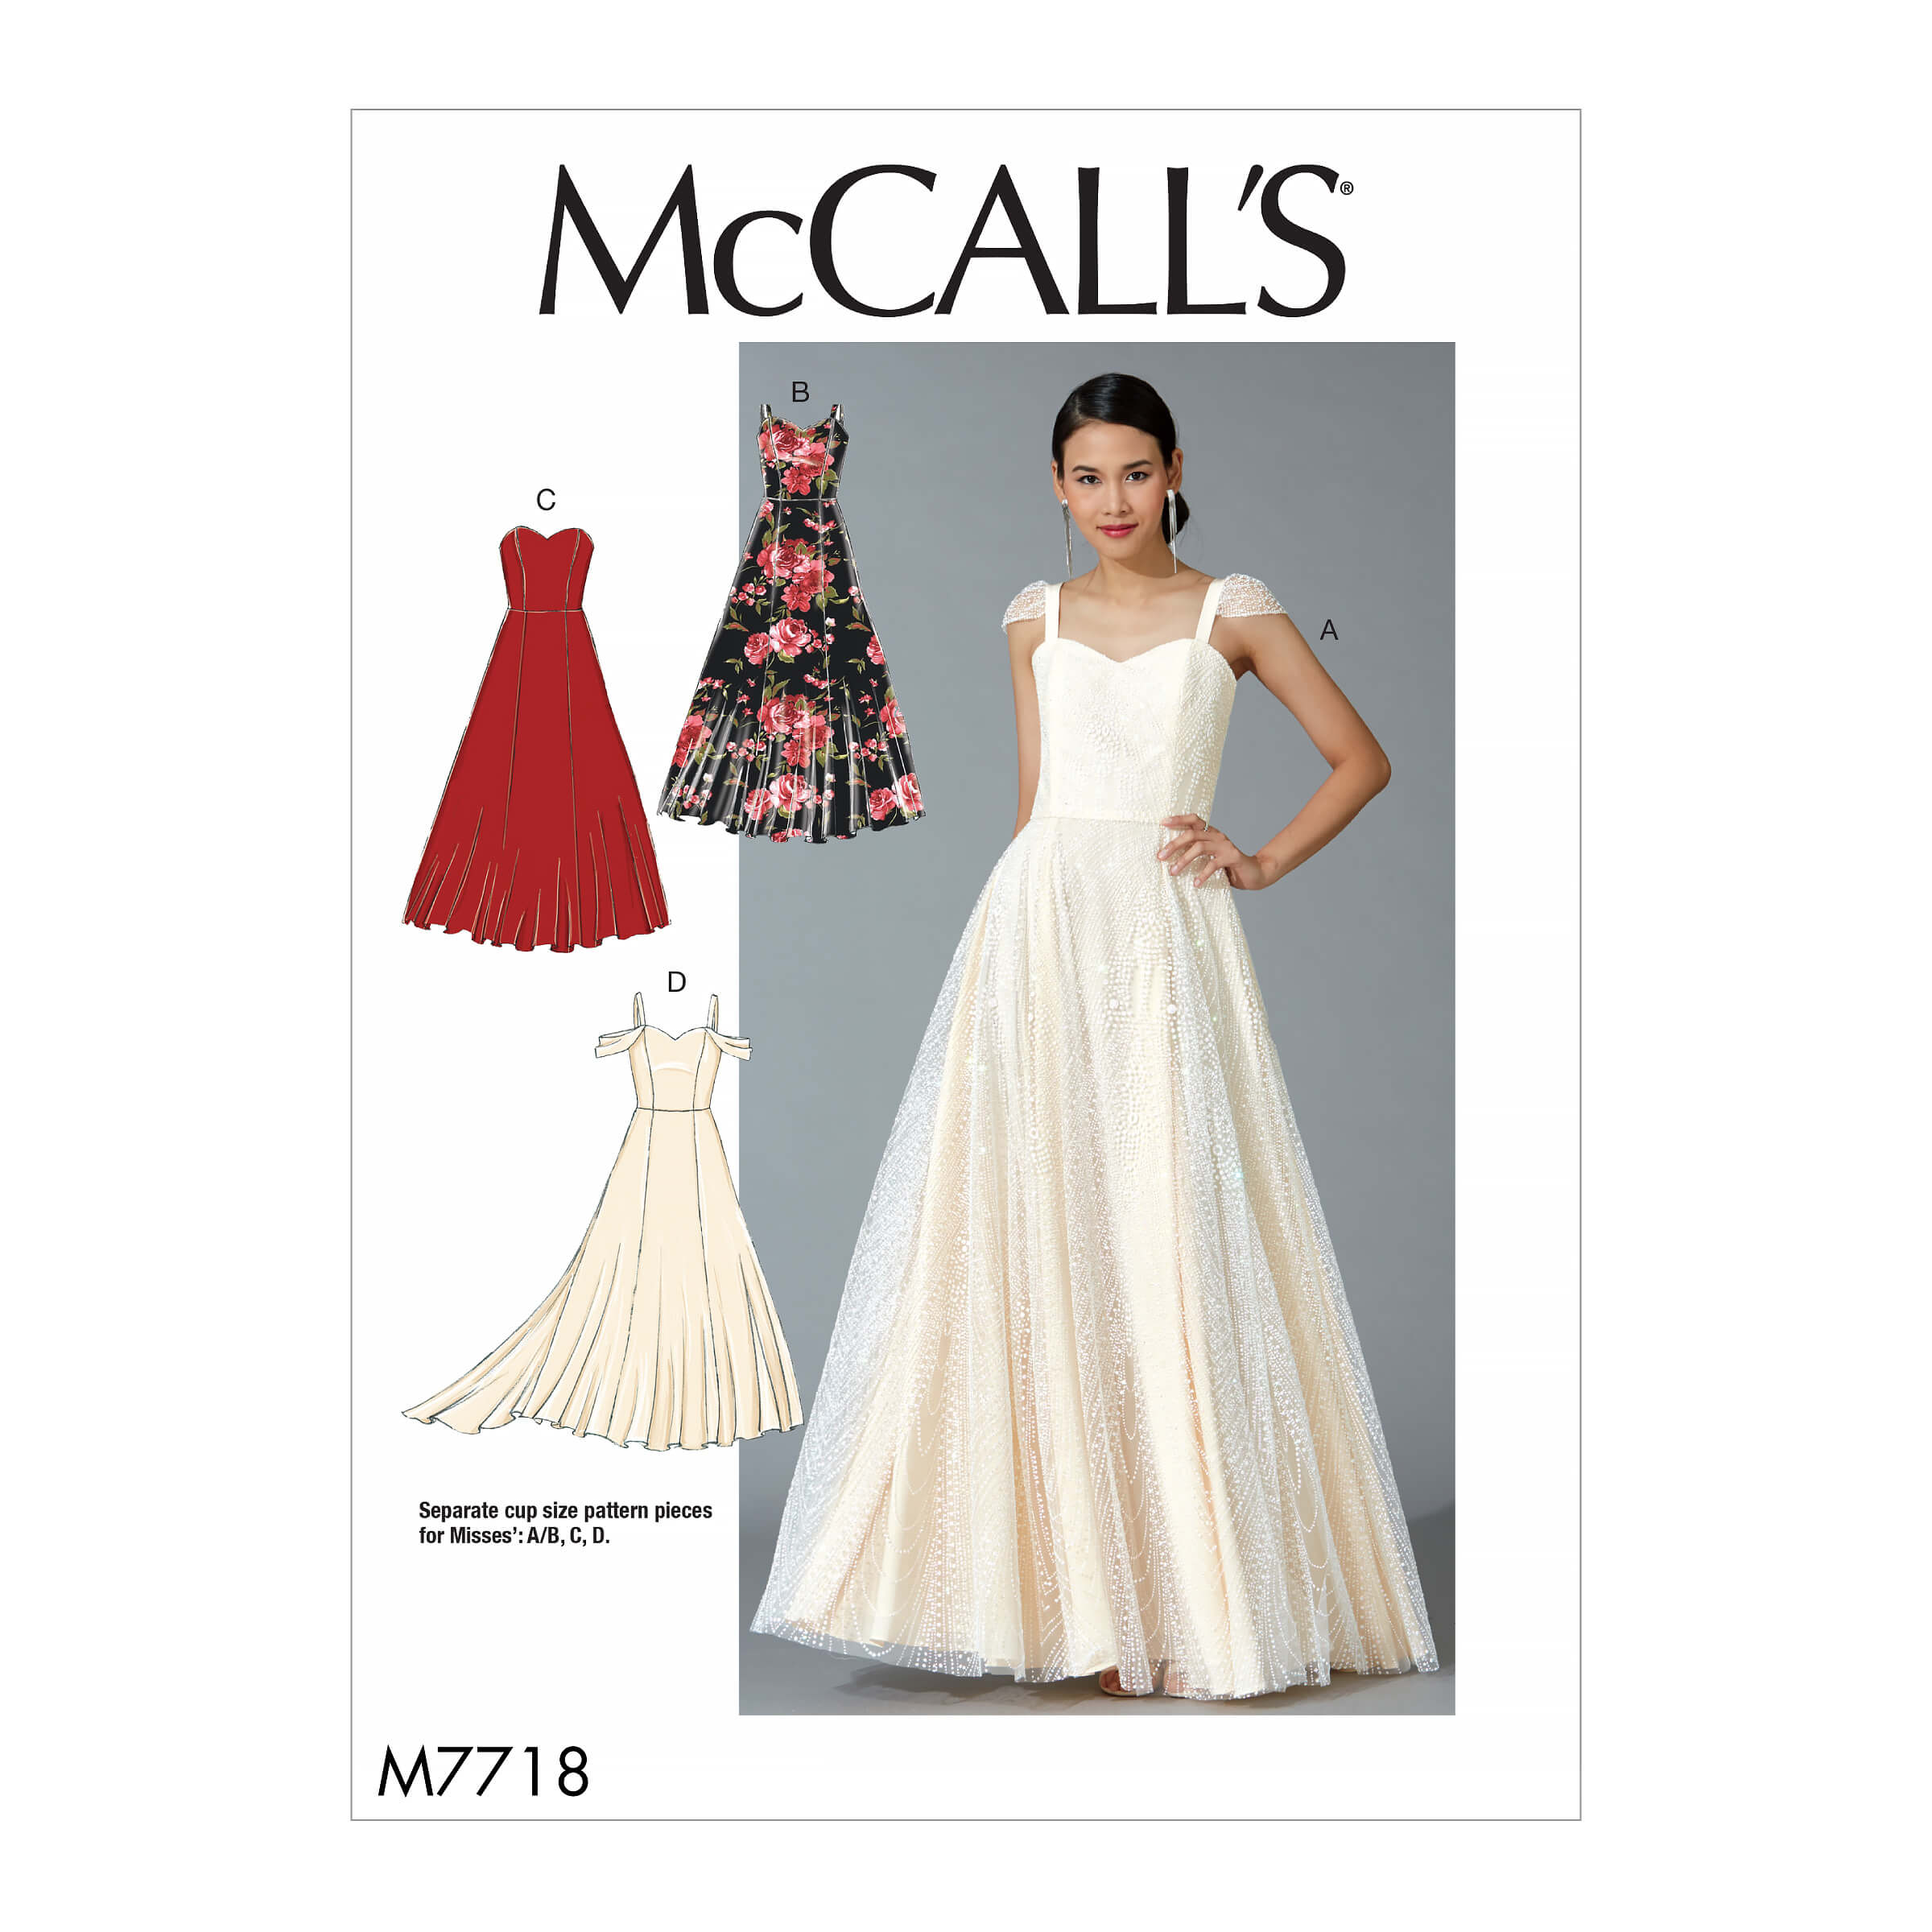 McCall's Sewing Pattern M7718 Misses' Dresses